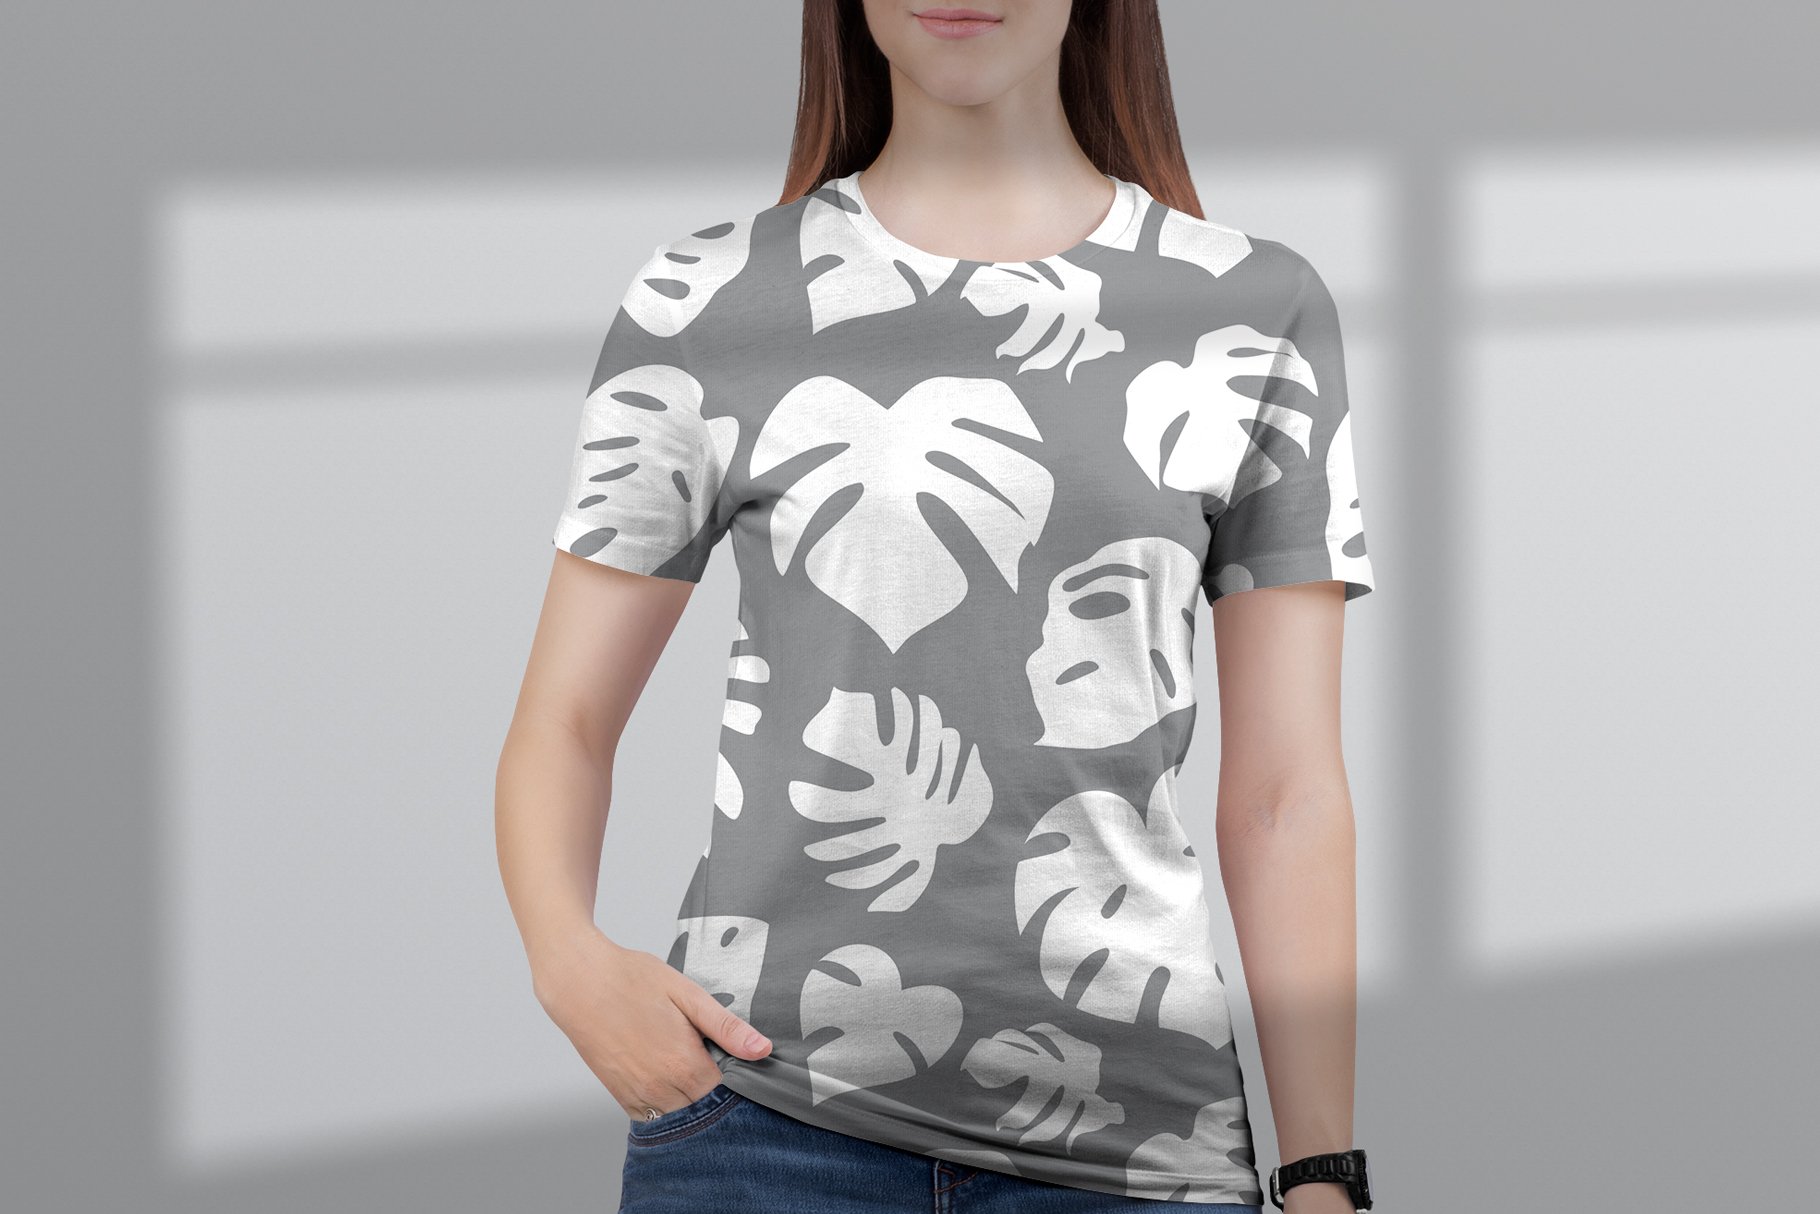 Grey t-shirt with white leaves.